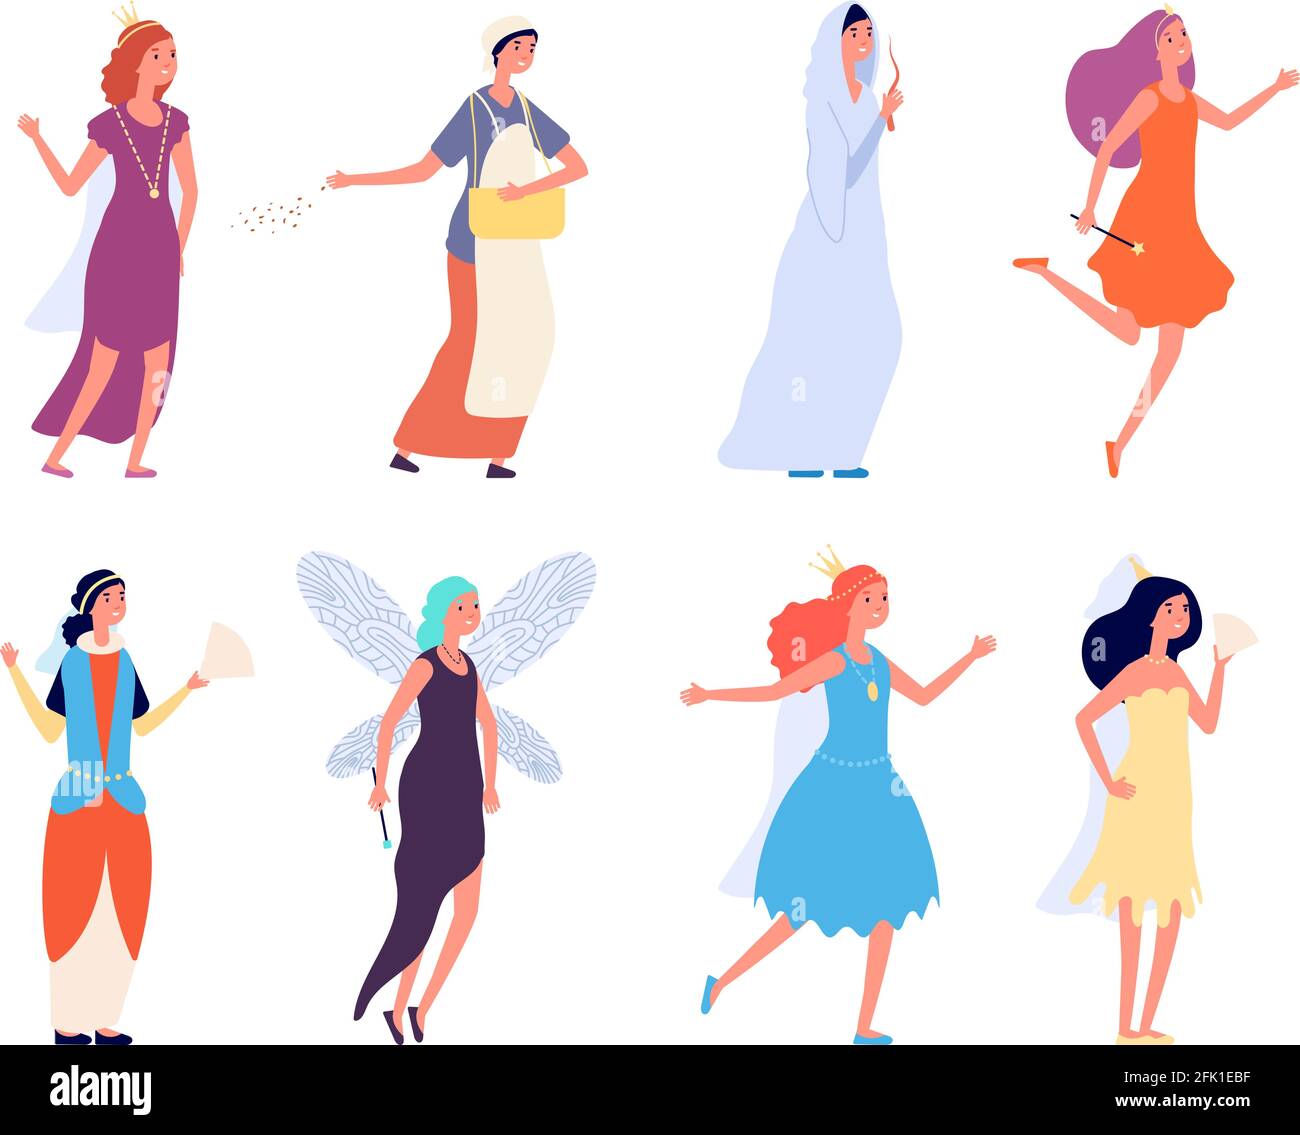 Female fairy tales characters. Women in festive suits. Happy isolated actress. Princesses queen medieval maid. Fantasy magic girls vector illustration Stock Vector